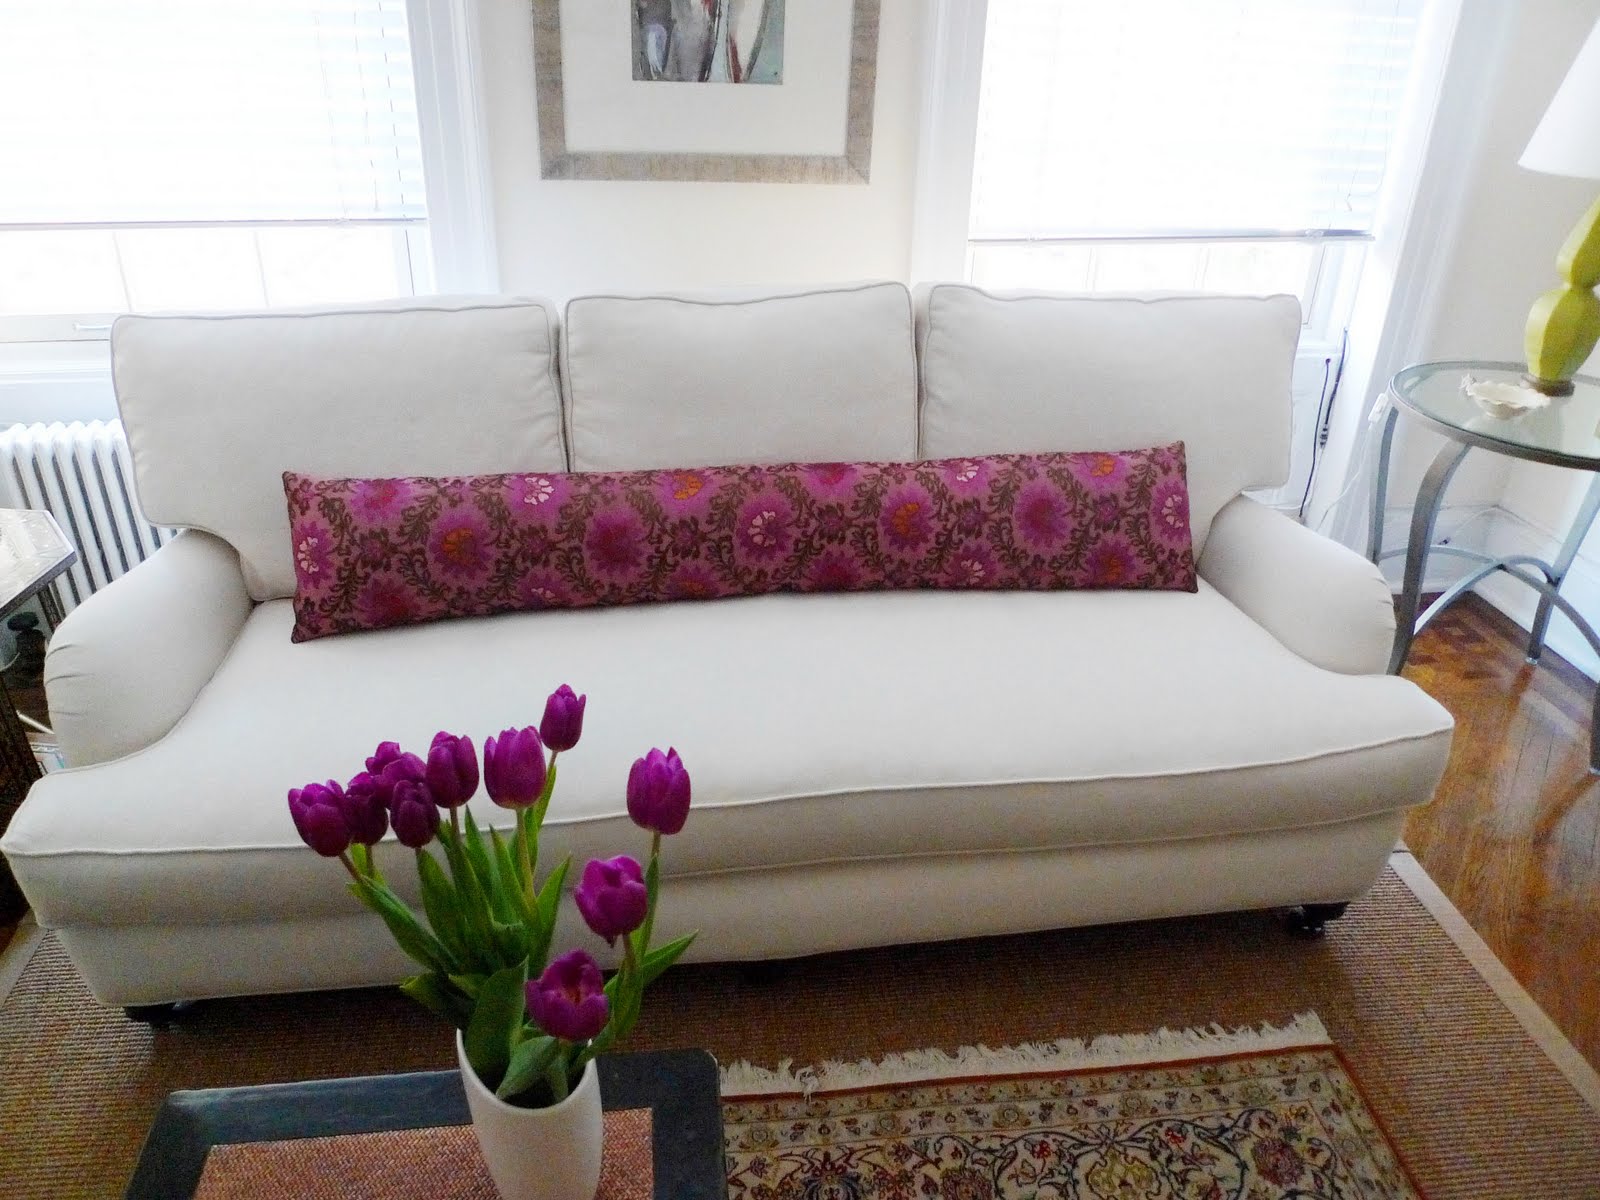 COCOCOZY: BEFORE & AFTER: MICRO MAKEOVER - ANATOMY OF A NYC SOFA REDO!